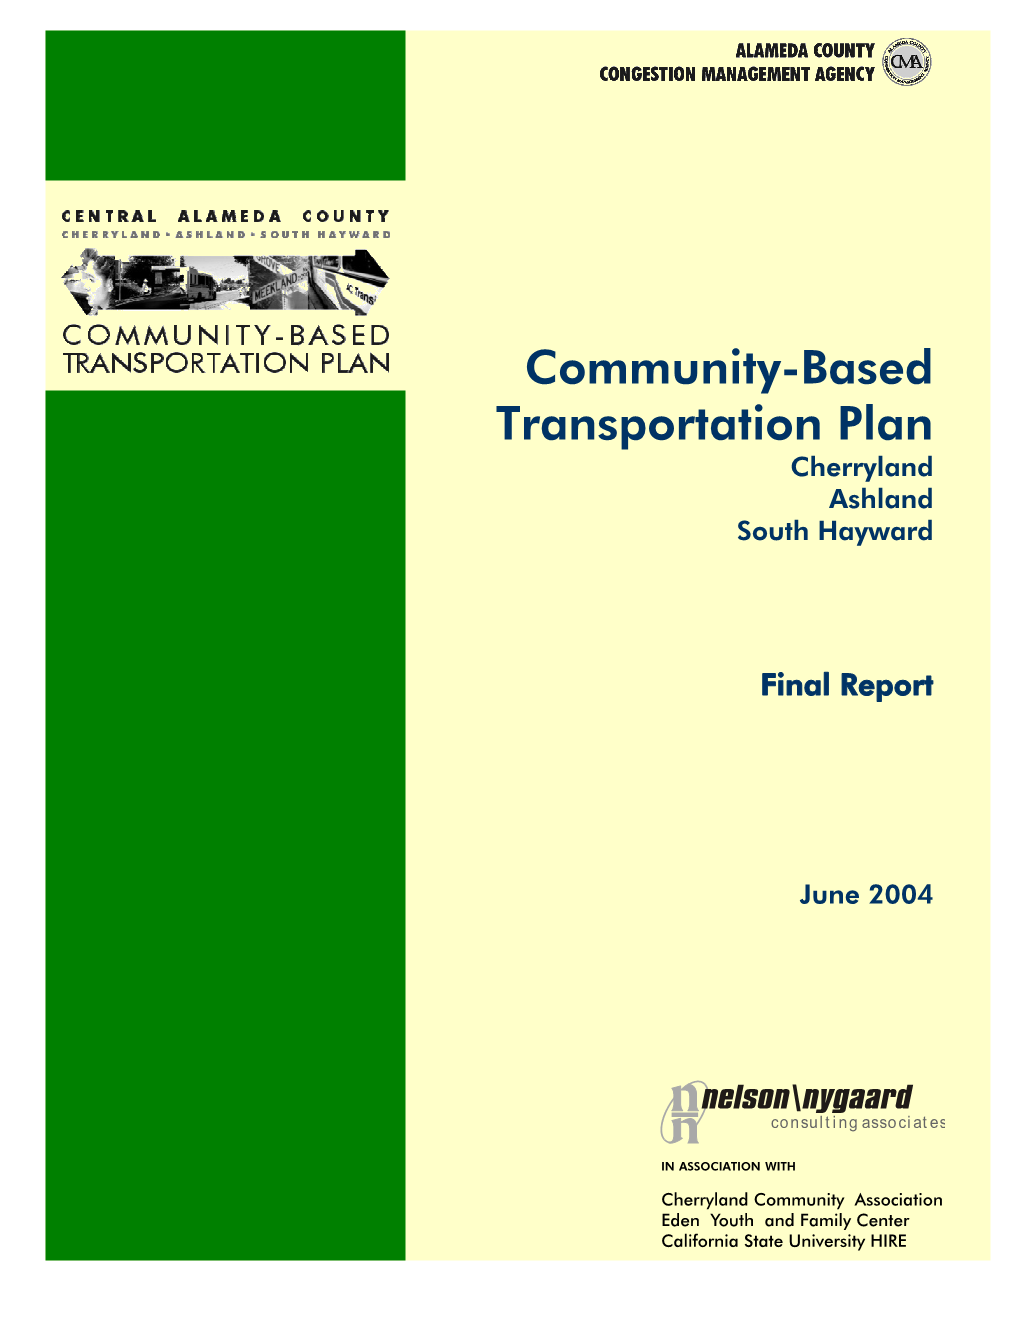 Central Alameda County Community-Based Transportation Plan Final Report ALAMEDA COUNTY CONGESTION MANAGEMENT AGENCY